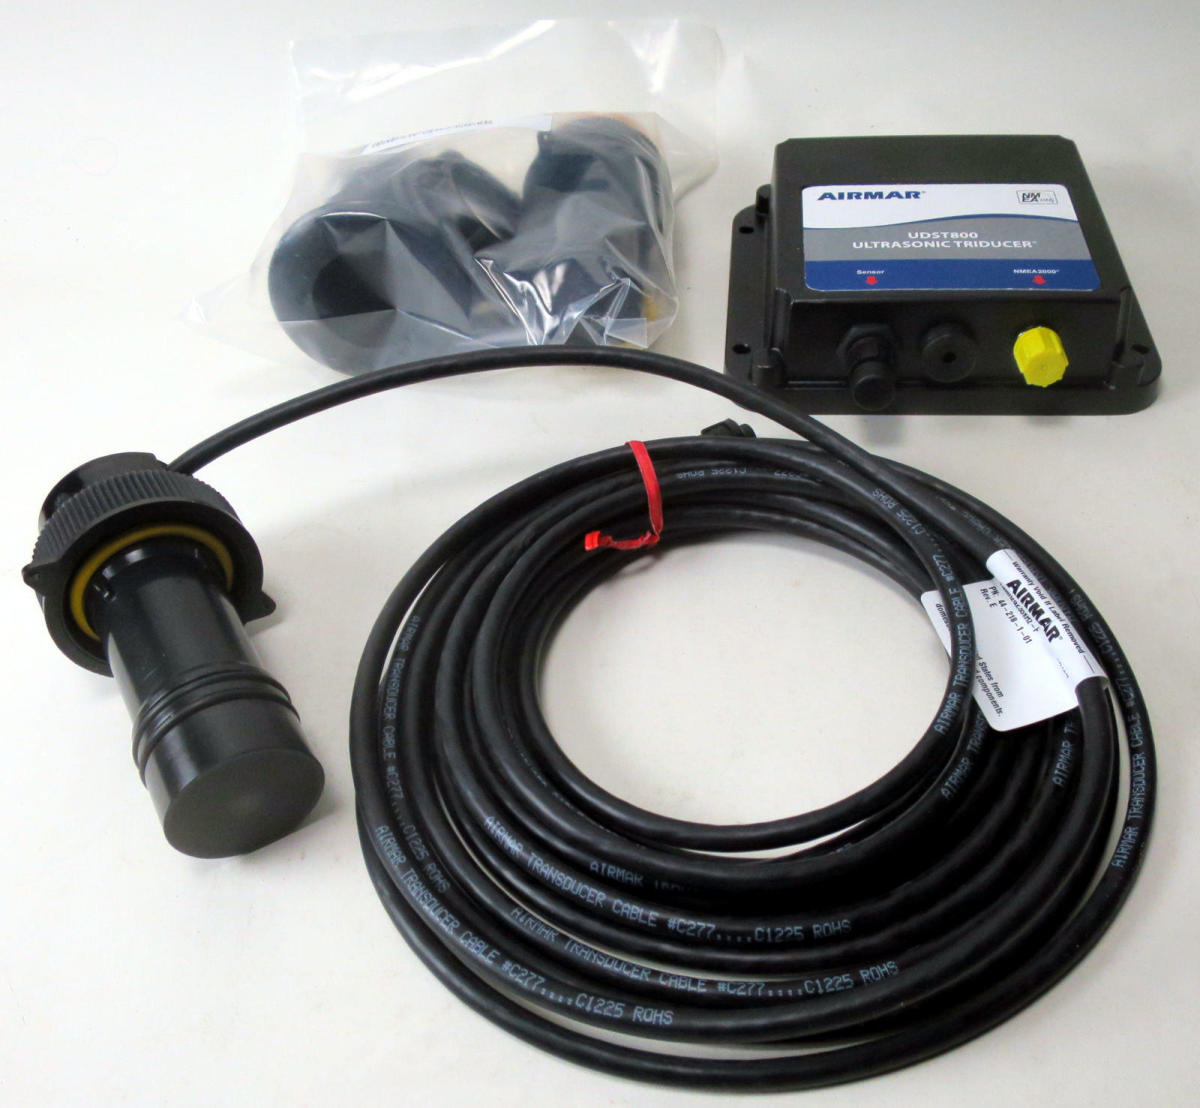 06-Airmar_UDST800_Ultrasonic_Triducer_unboxing_cPanbo